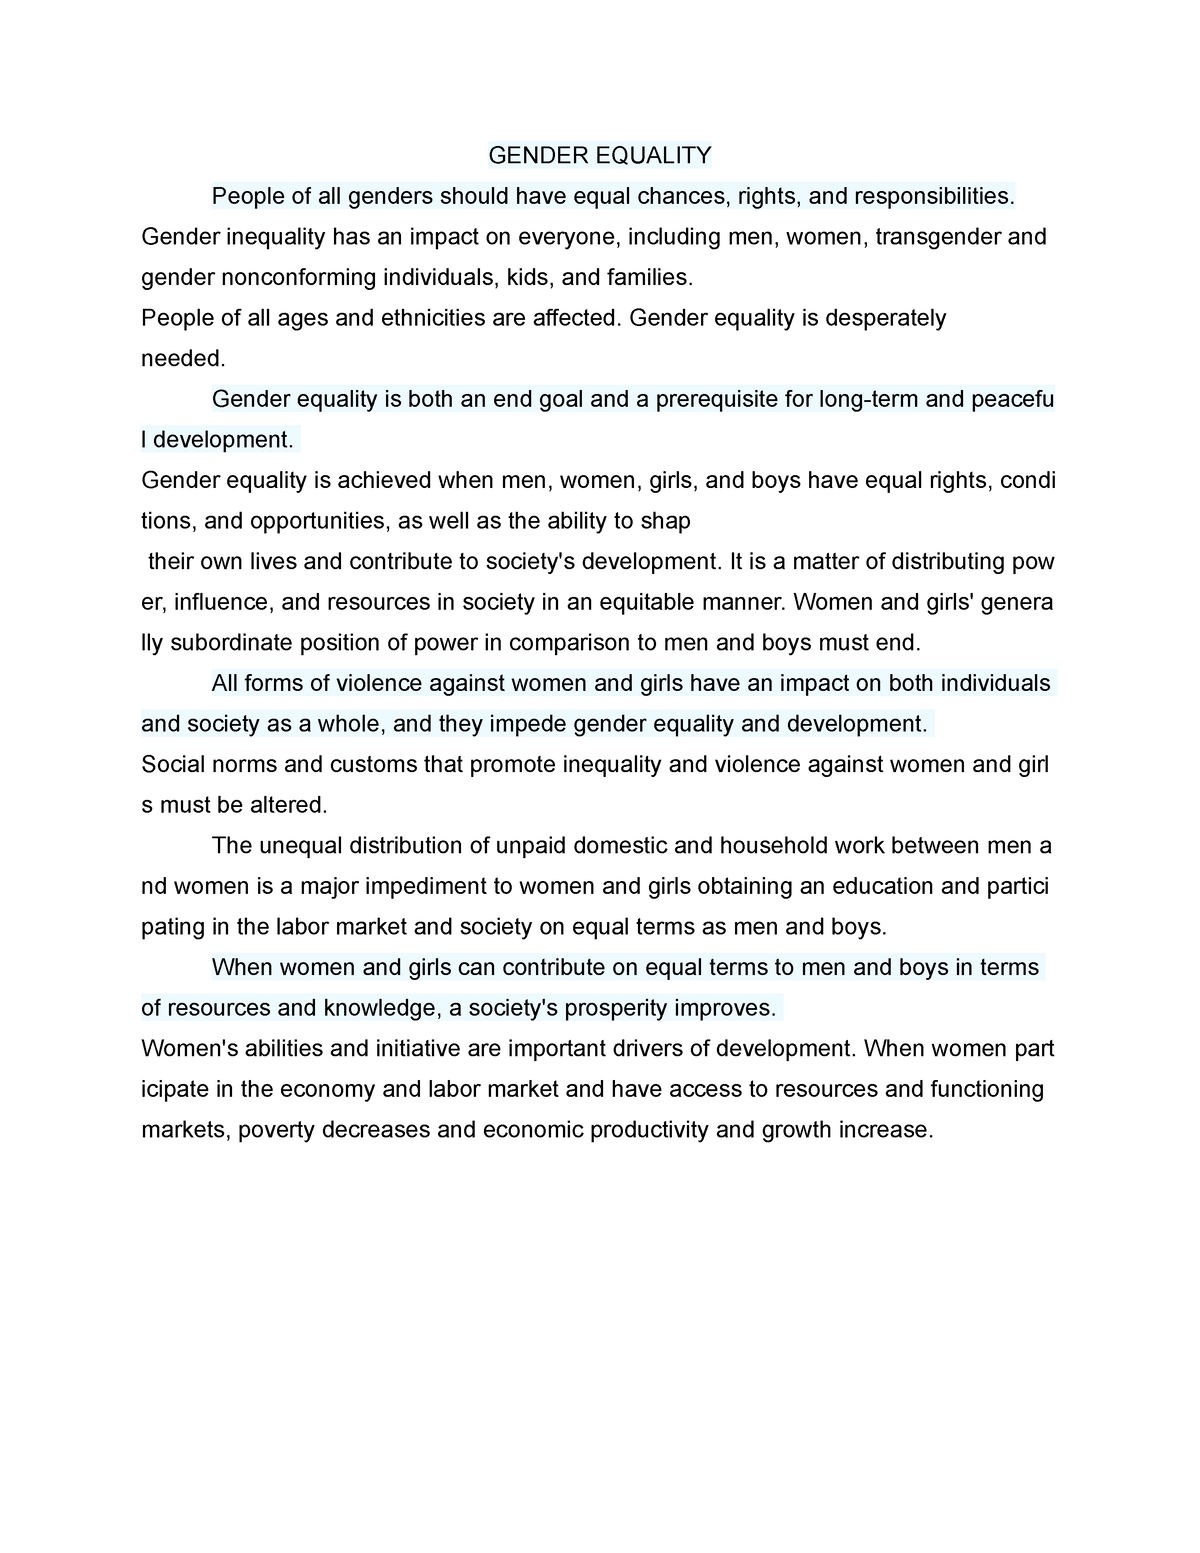 essay about gender and development